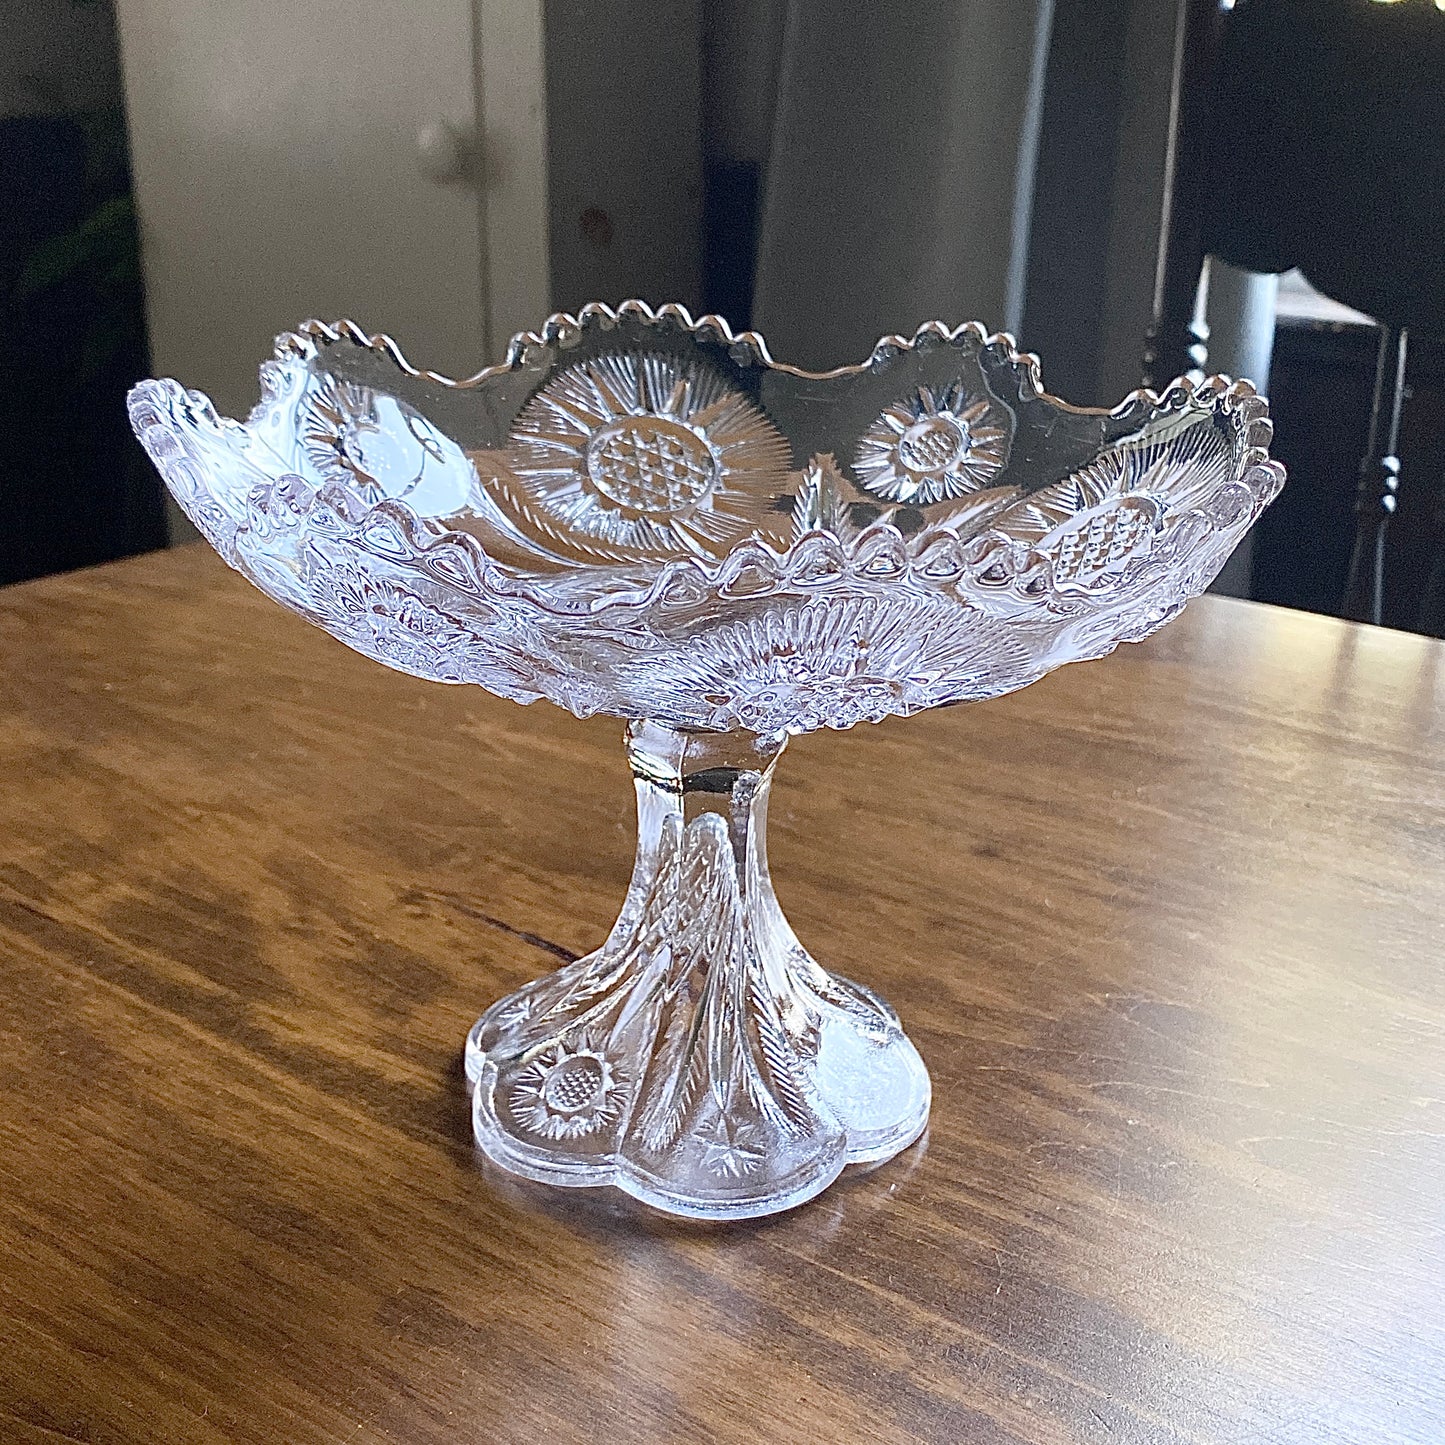 Early Pressed Glass Compote, 'Solar' or 'Feather Swirl' Pattern